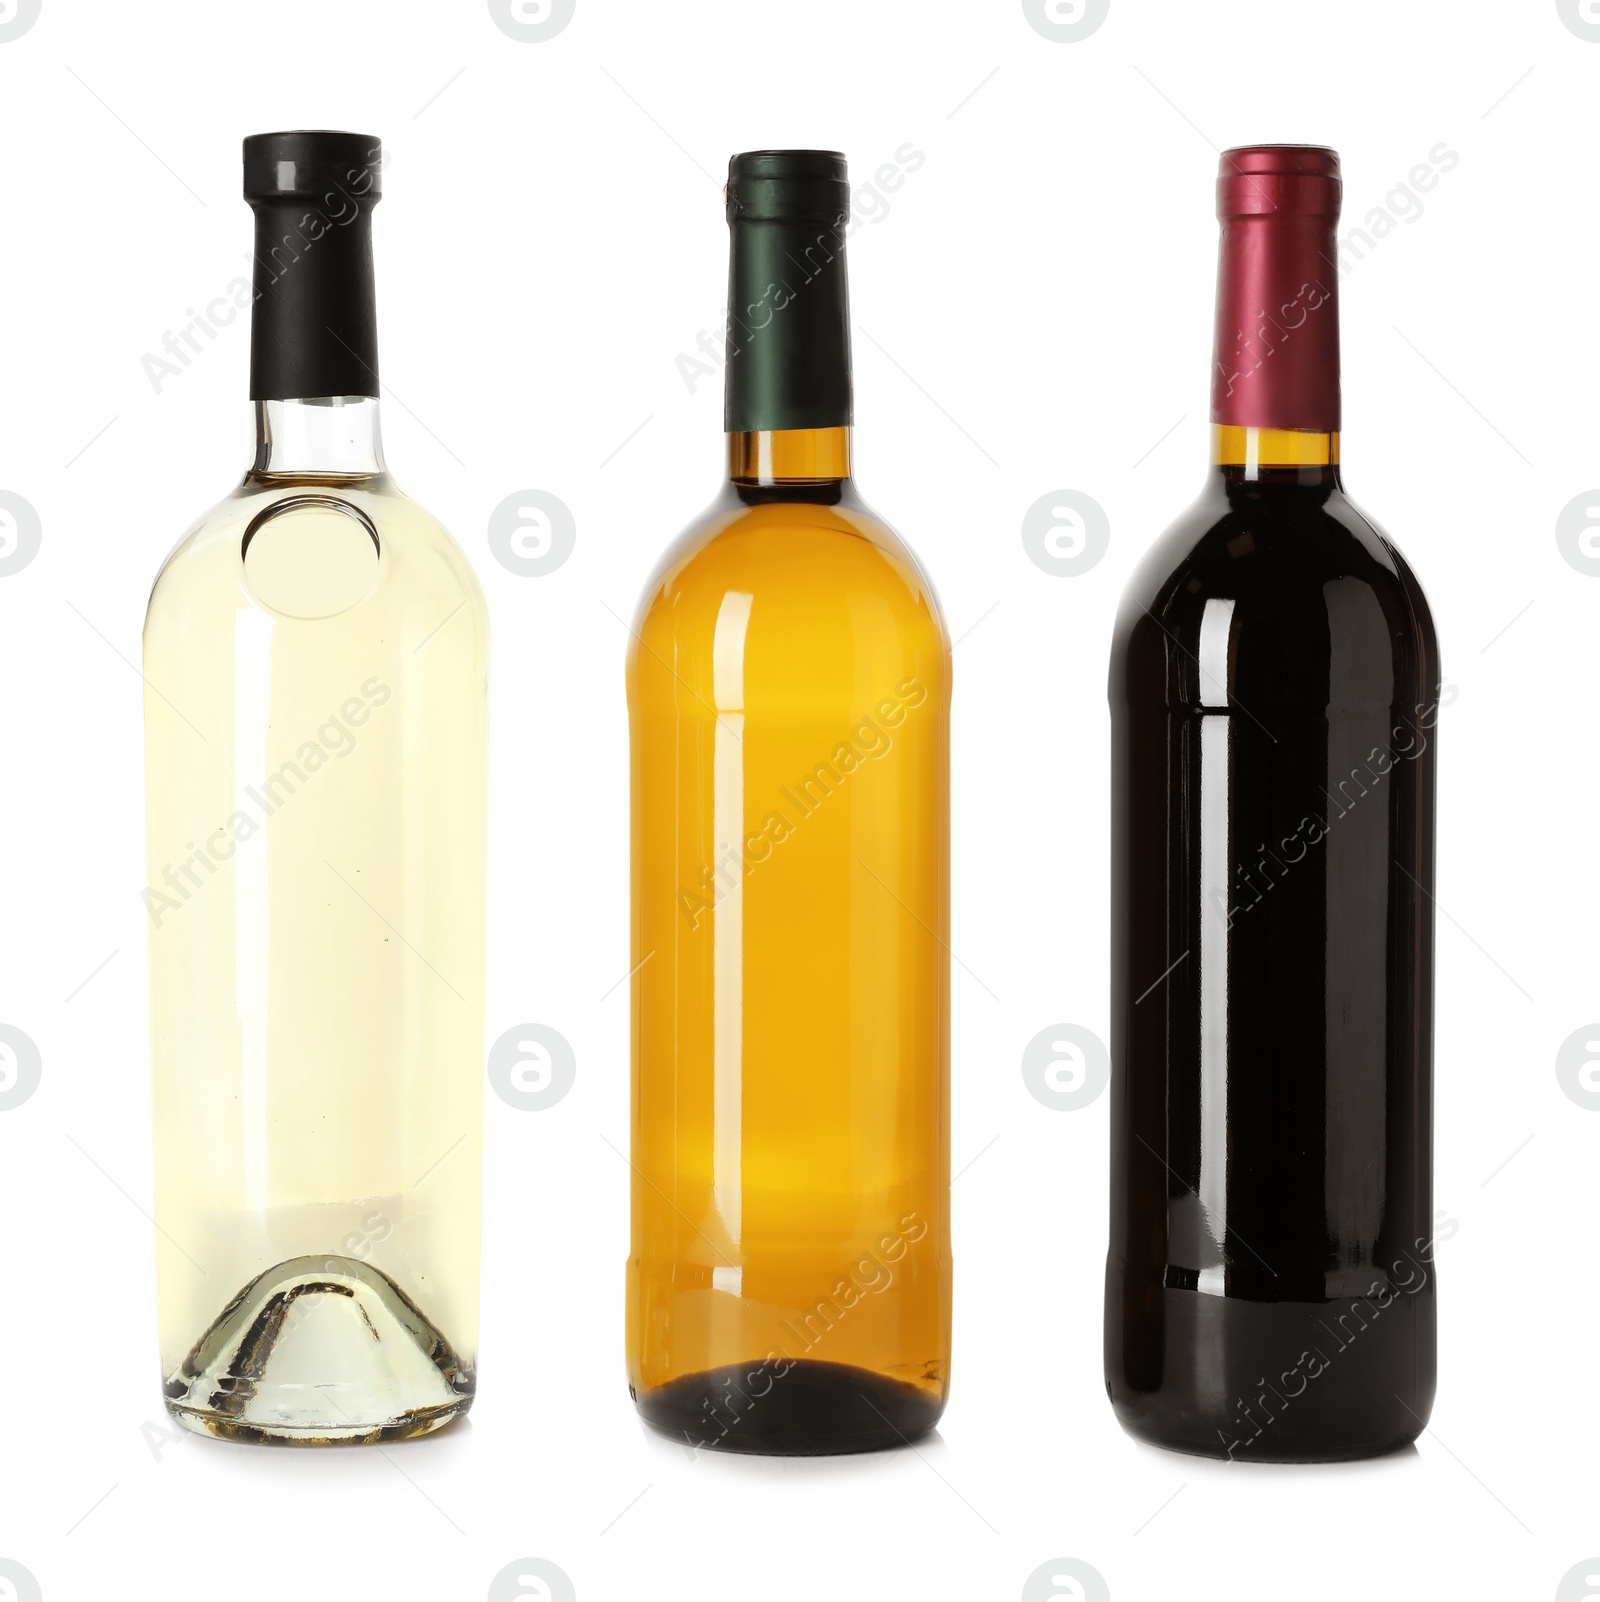 Photo of Bottle with different types of wine on white background